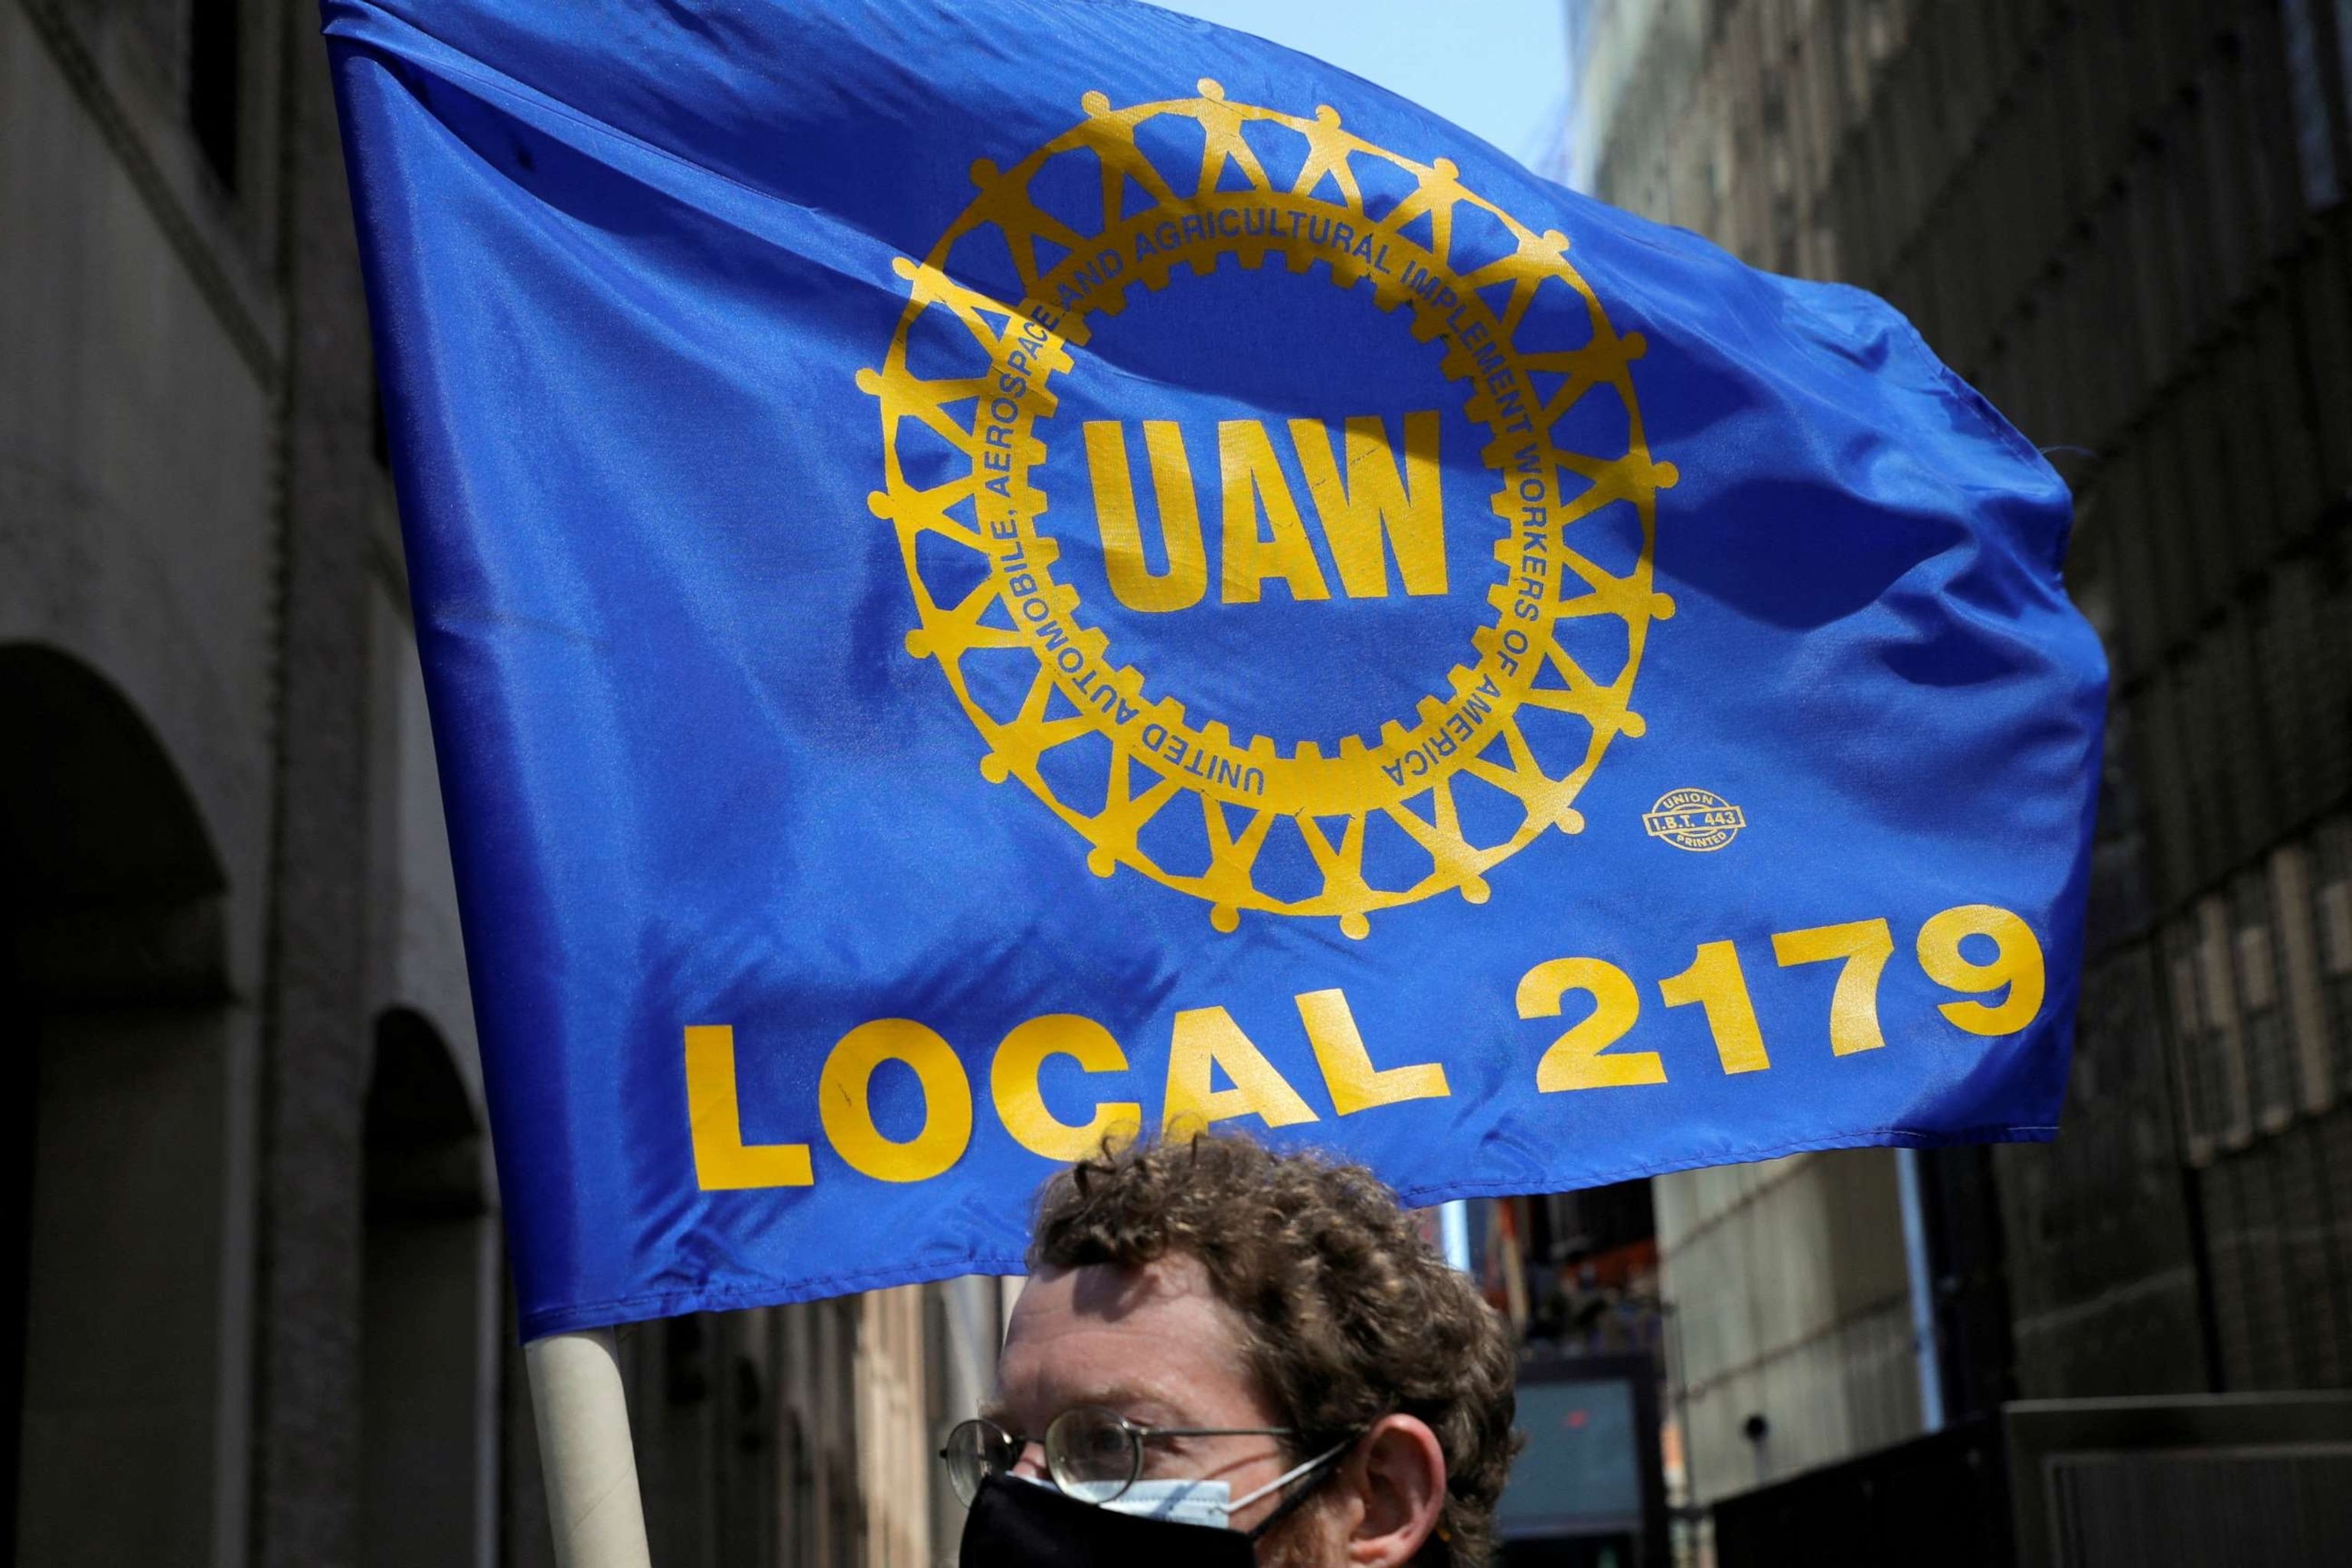 PHOTO: A person carries a flag with the patch from the United Auto Workers (UAW) labor union during a May Day rally for media workers held by The NewsGuild of New York on International Workers' Day in Manhattan, New York City, May 1, 2021.